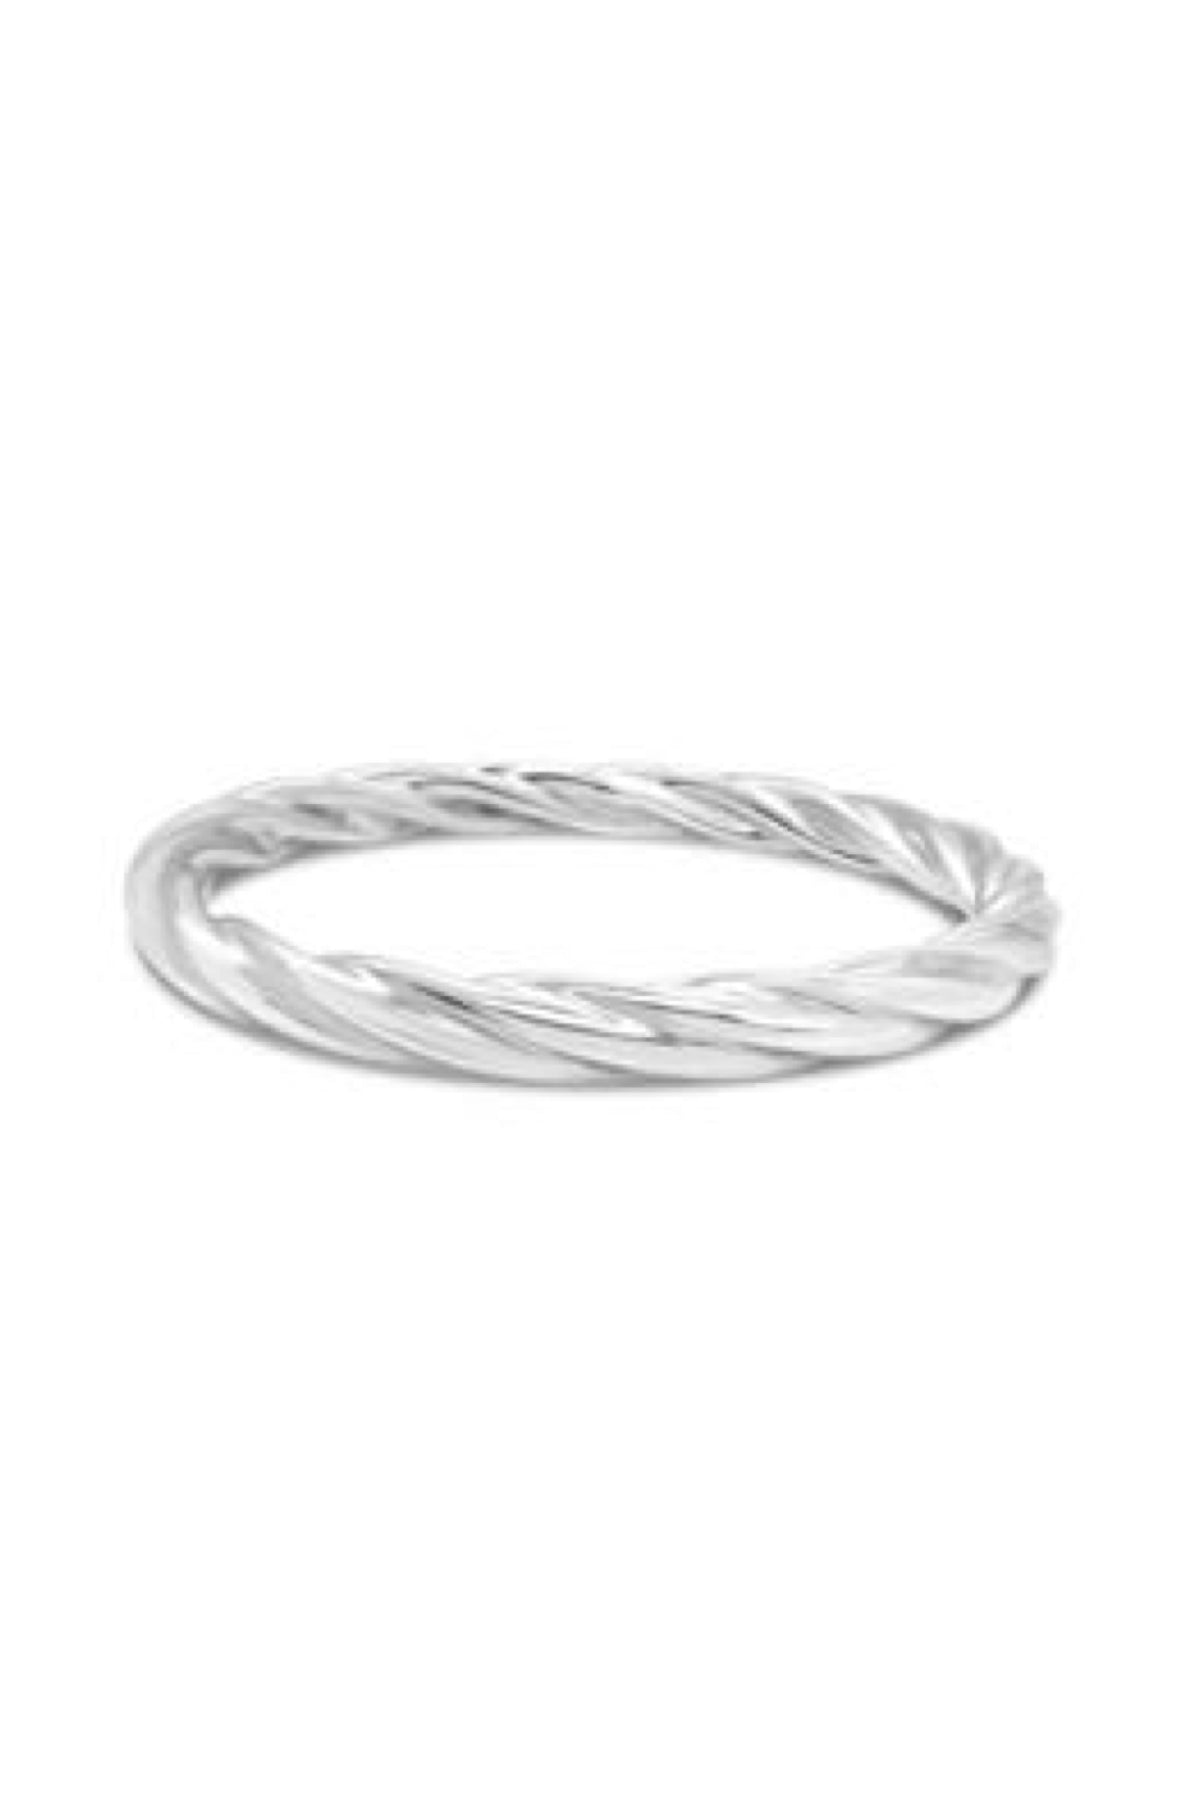 Thick Sterling Silver Twist Bangle 7x62mm